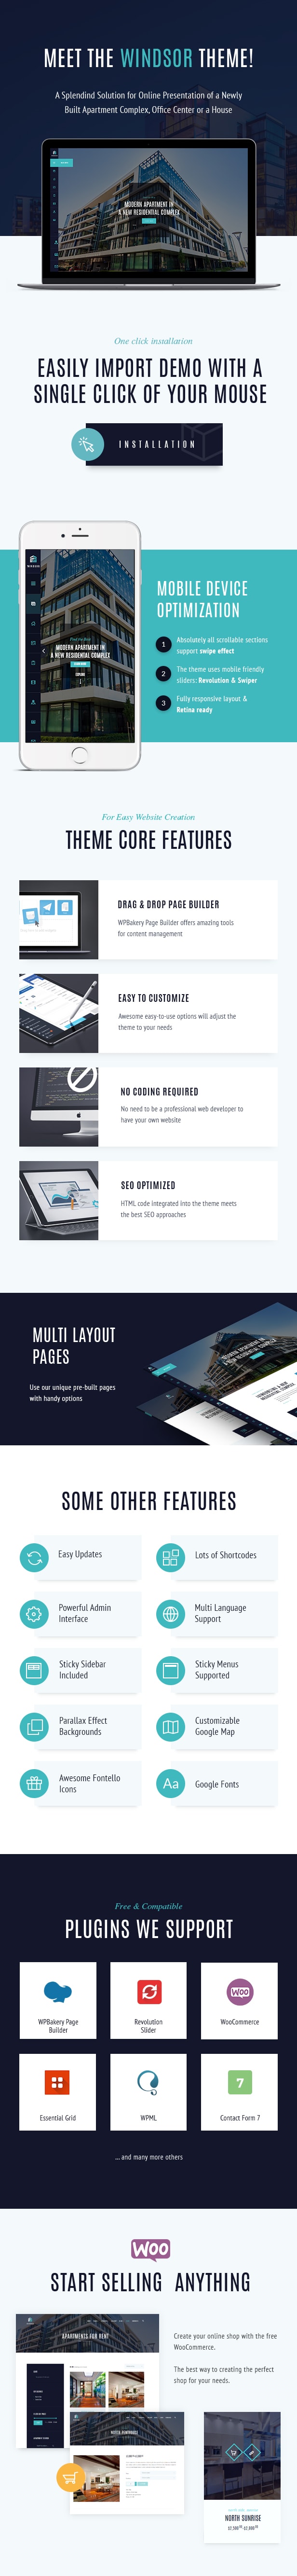 Website page template.